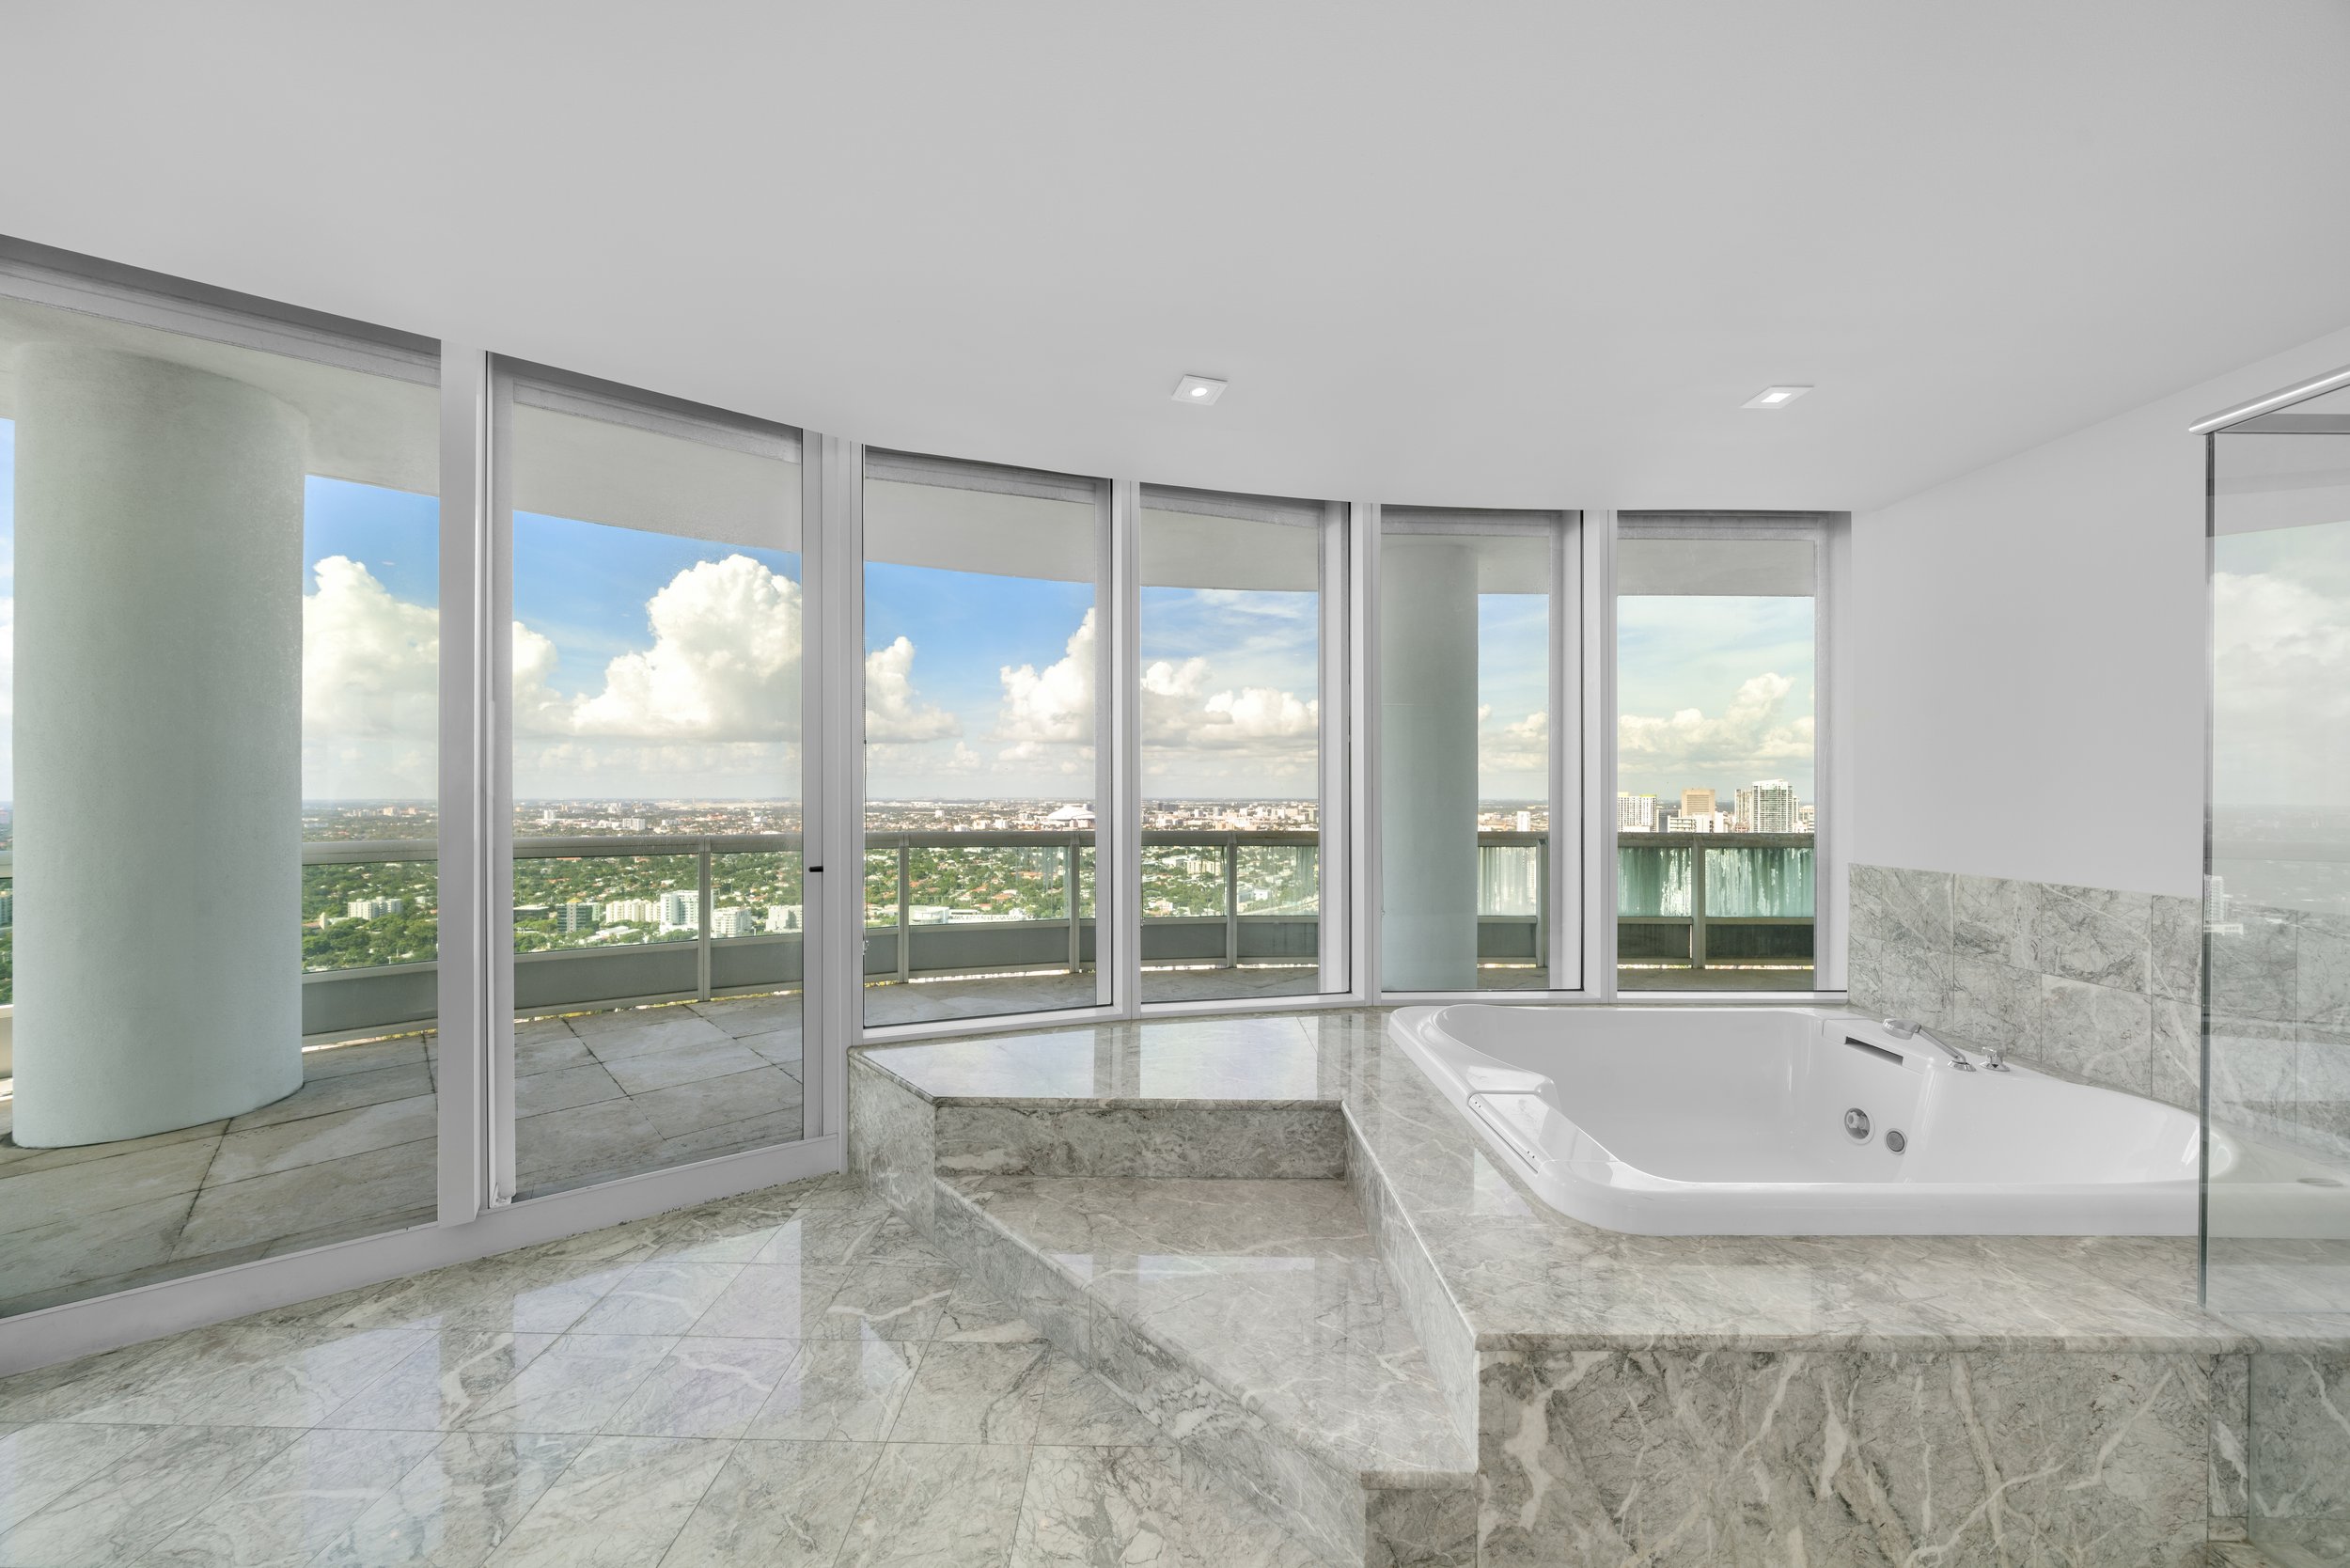 Beyonce, Elton John and Guns N' Roses Former Manager Lists Penthouse Atop Brickell's Exclusive Santa Maria Bayfront Condo Tower For $15 Million23.jpg